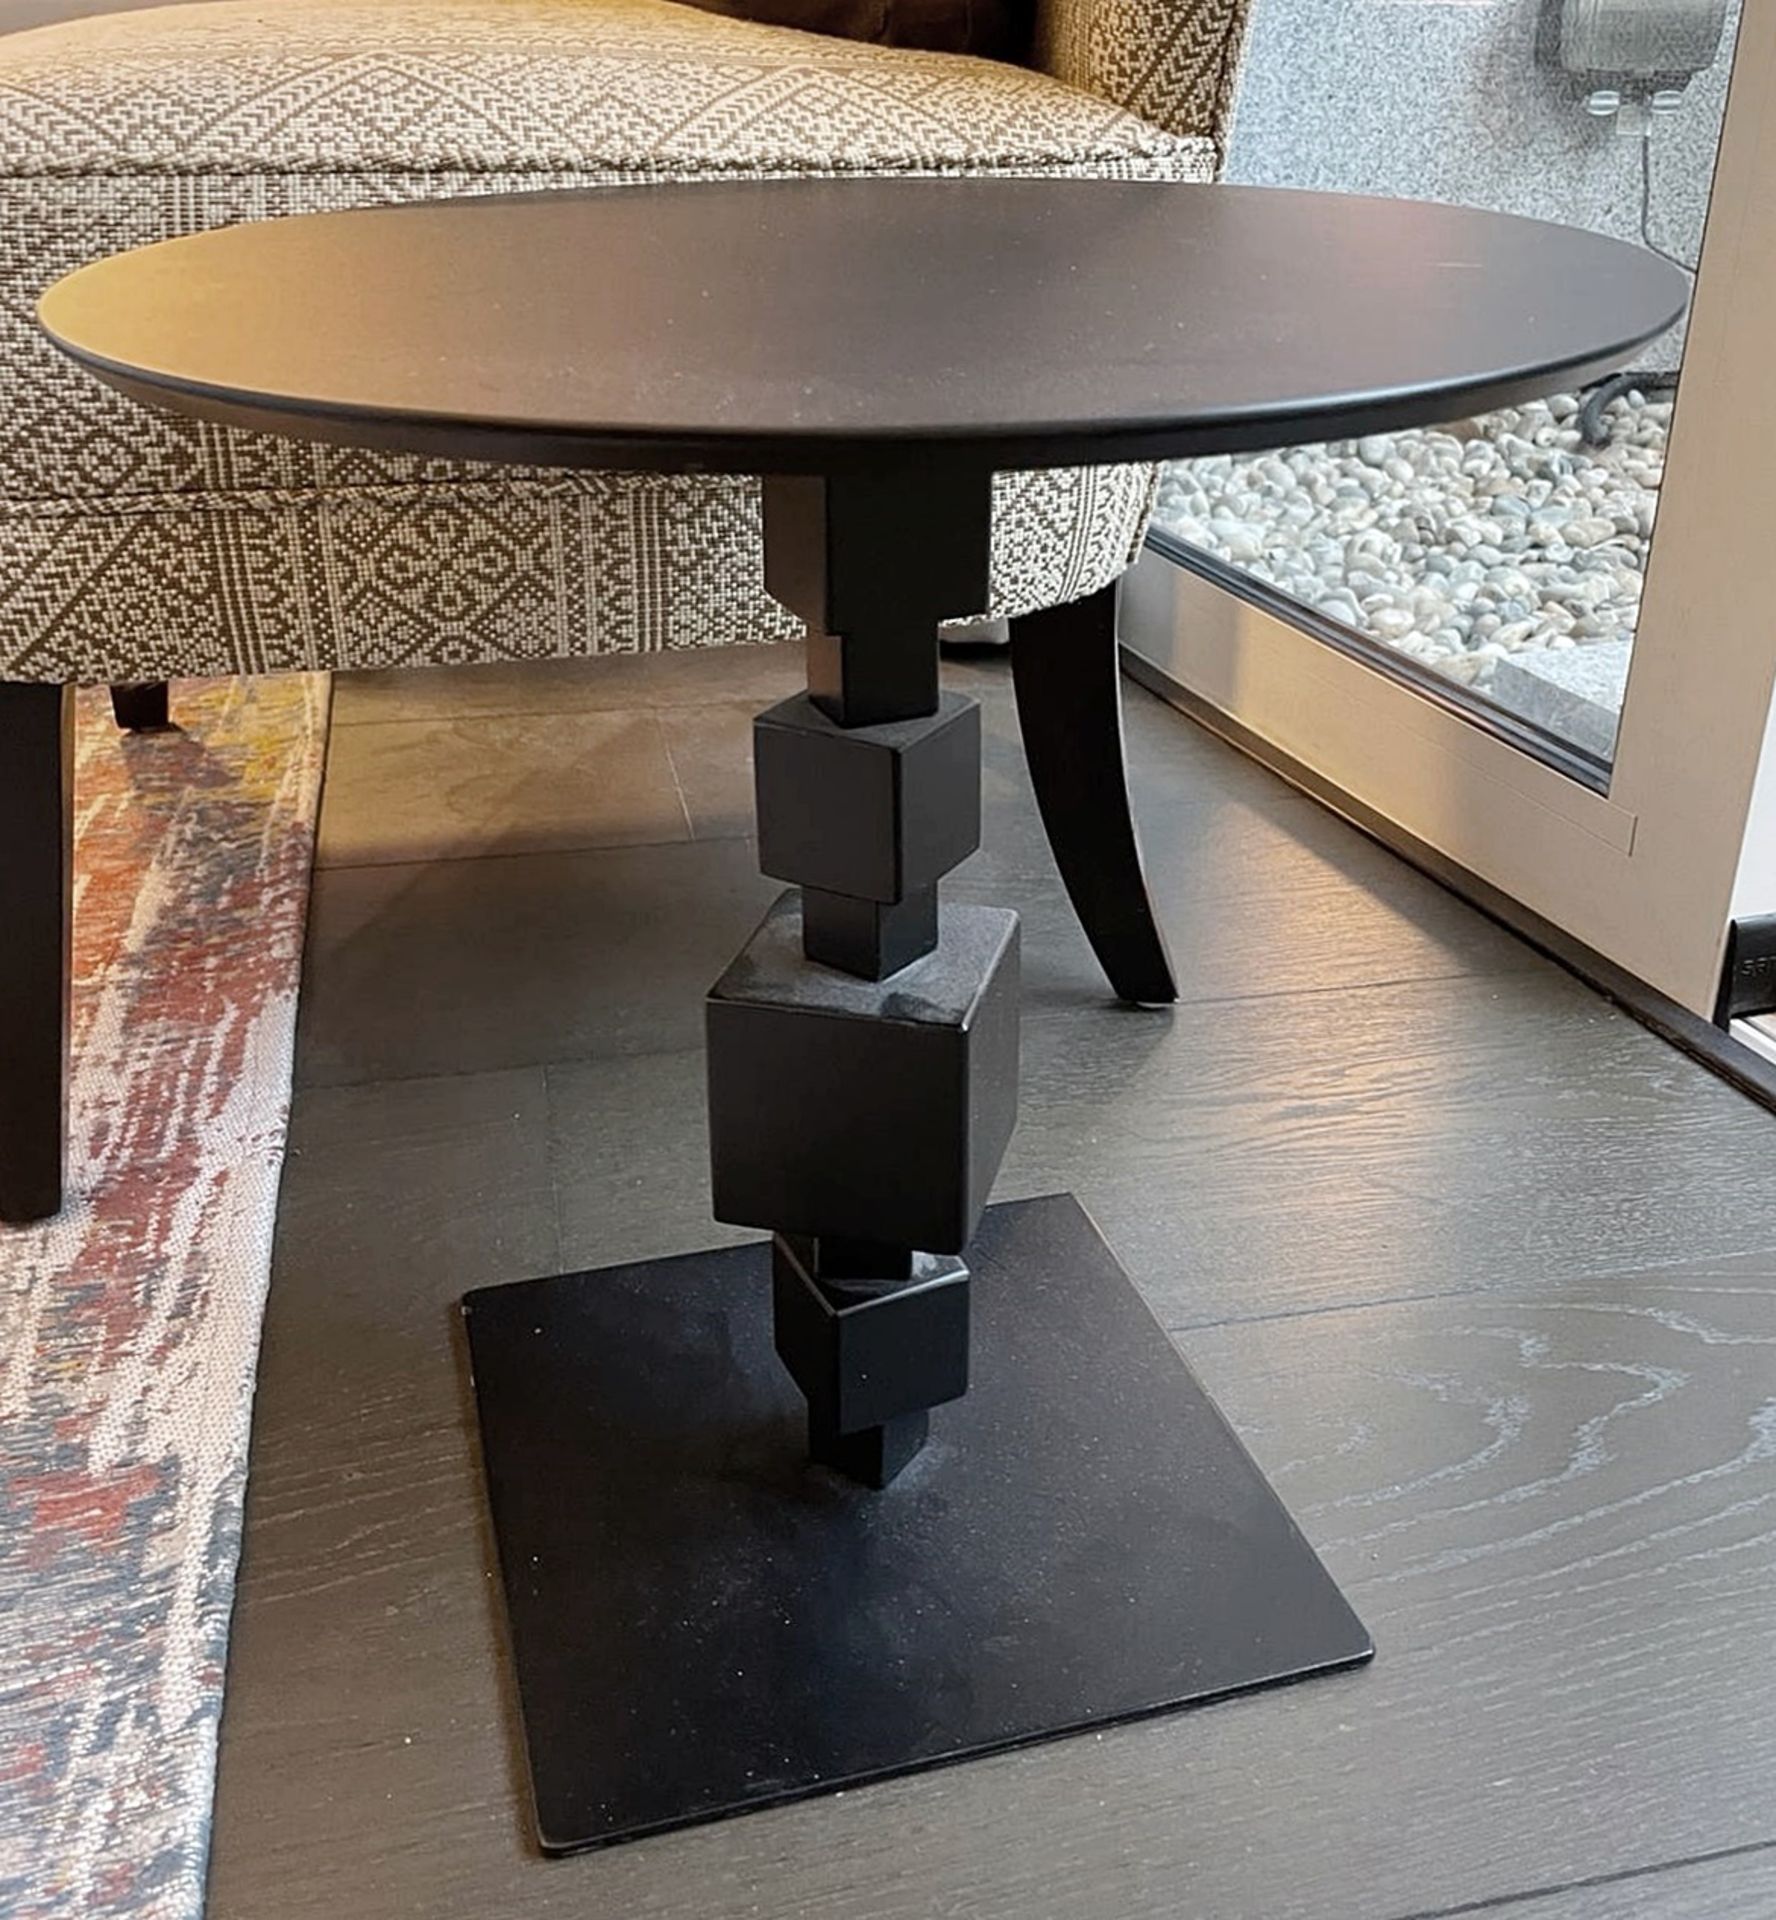 1 x NOLITA Occasional Side Table with a Cubed Metal Base, Bronzed Finish and Industrial - Image 9 of 9